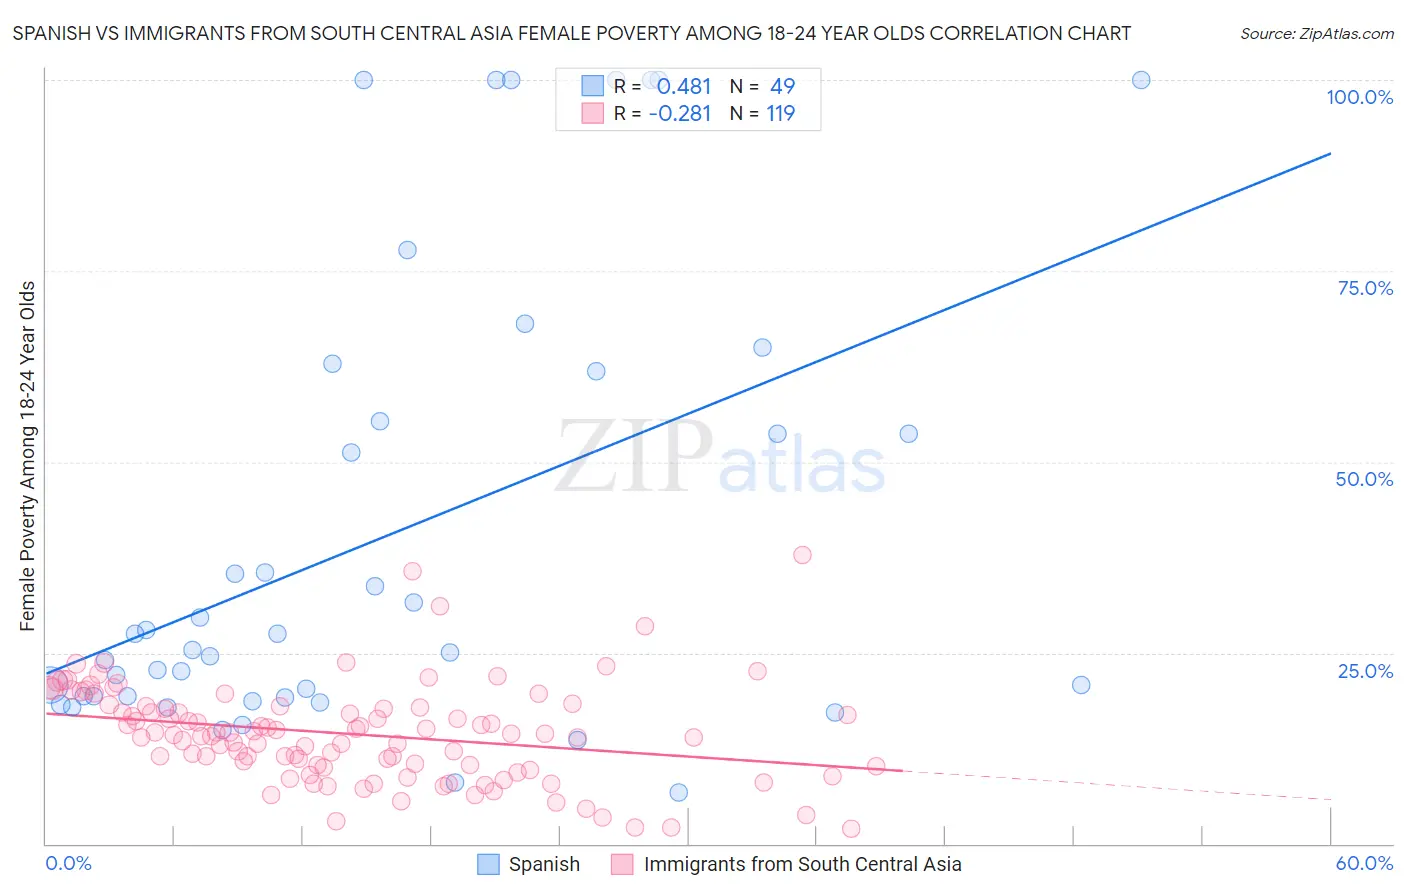 Spanish vs Immigrants from South Central Asia Female Poverty Among 18-24 Year Olds